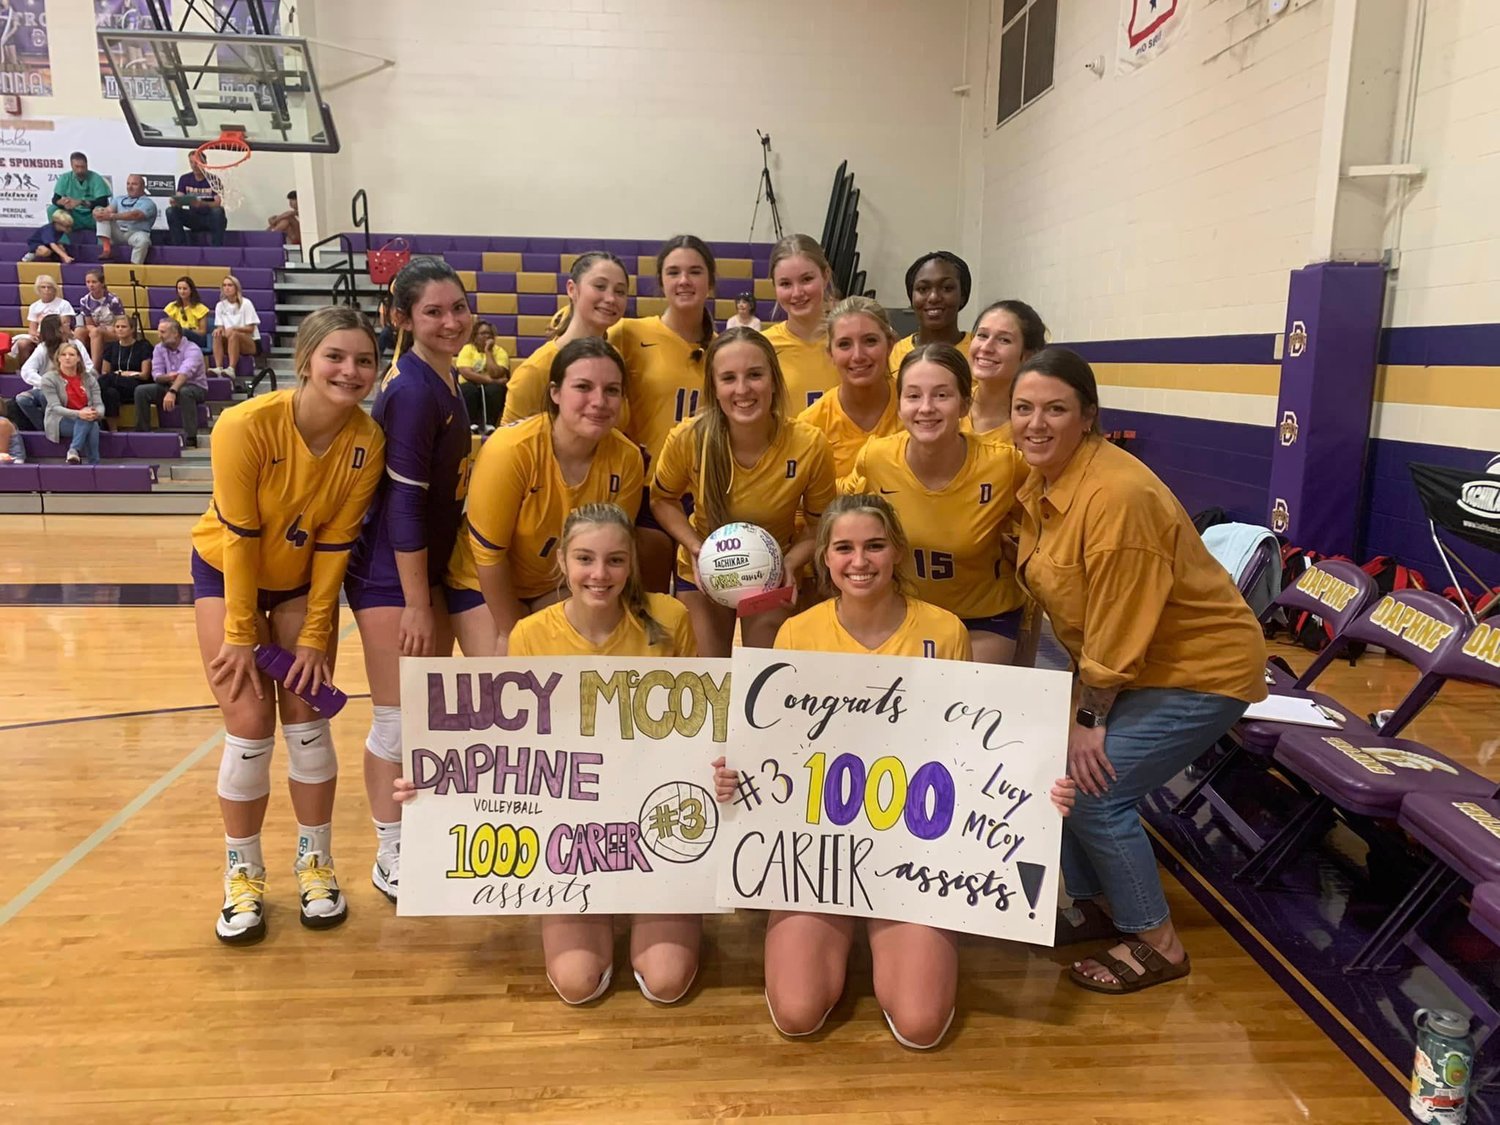 The Daphne Trojans celebrated their setter, Lucy McCoy, reaching 1,000 career assists Tuesday night at home.